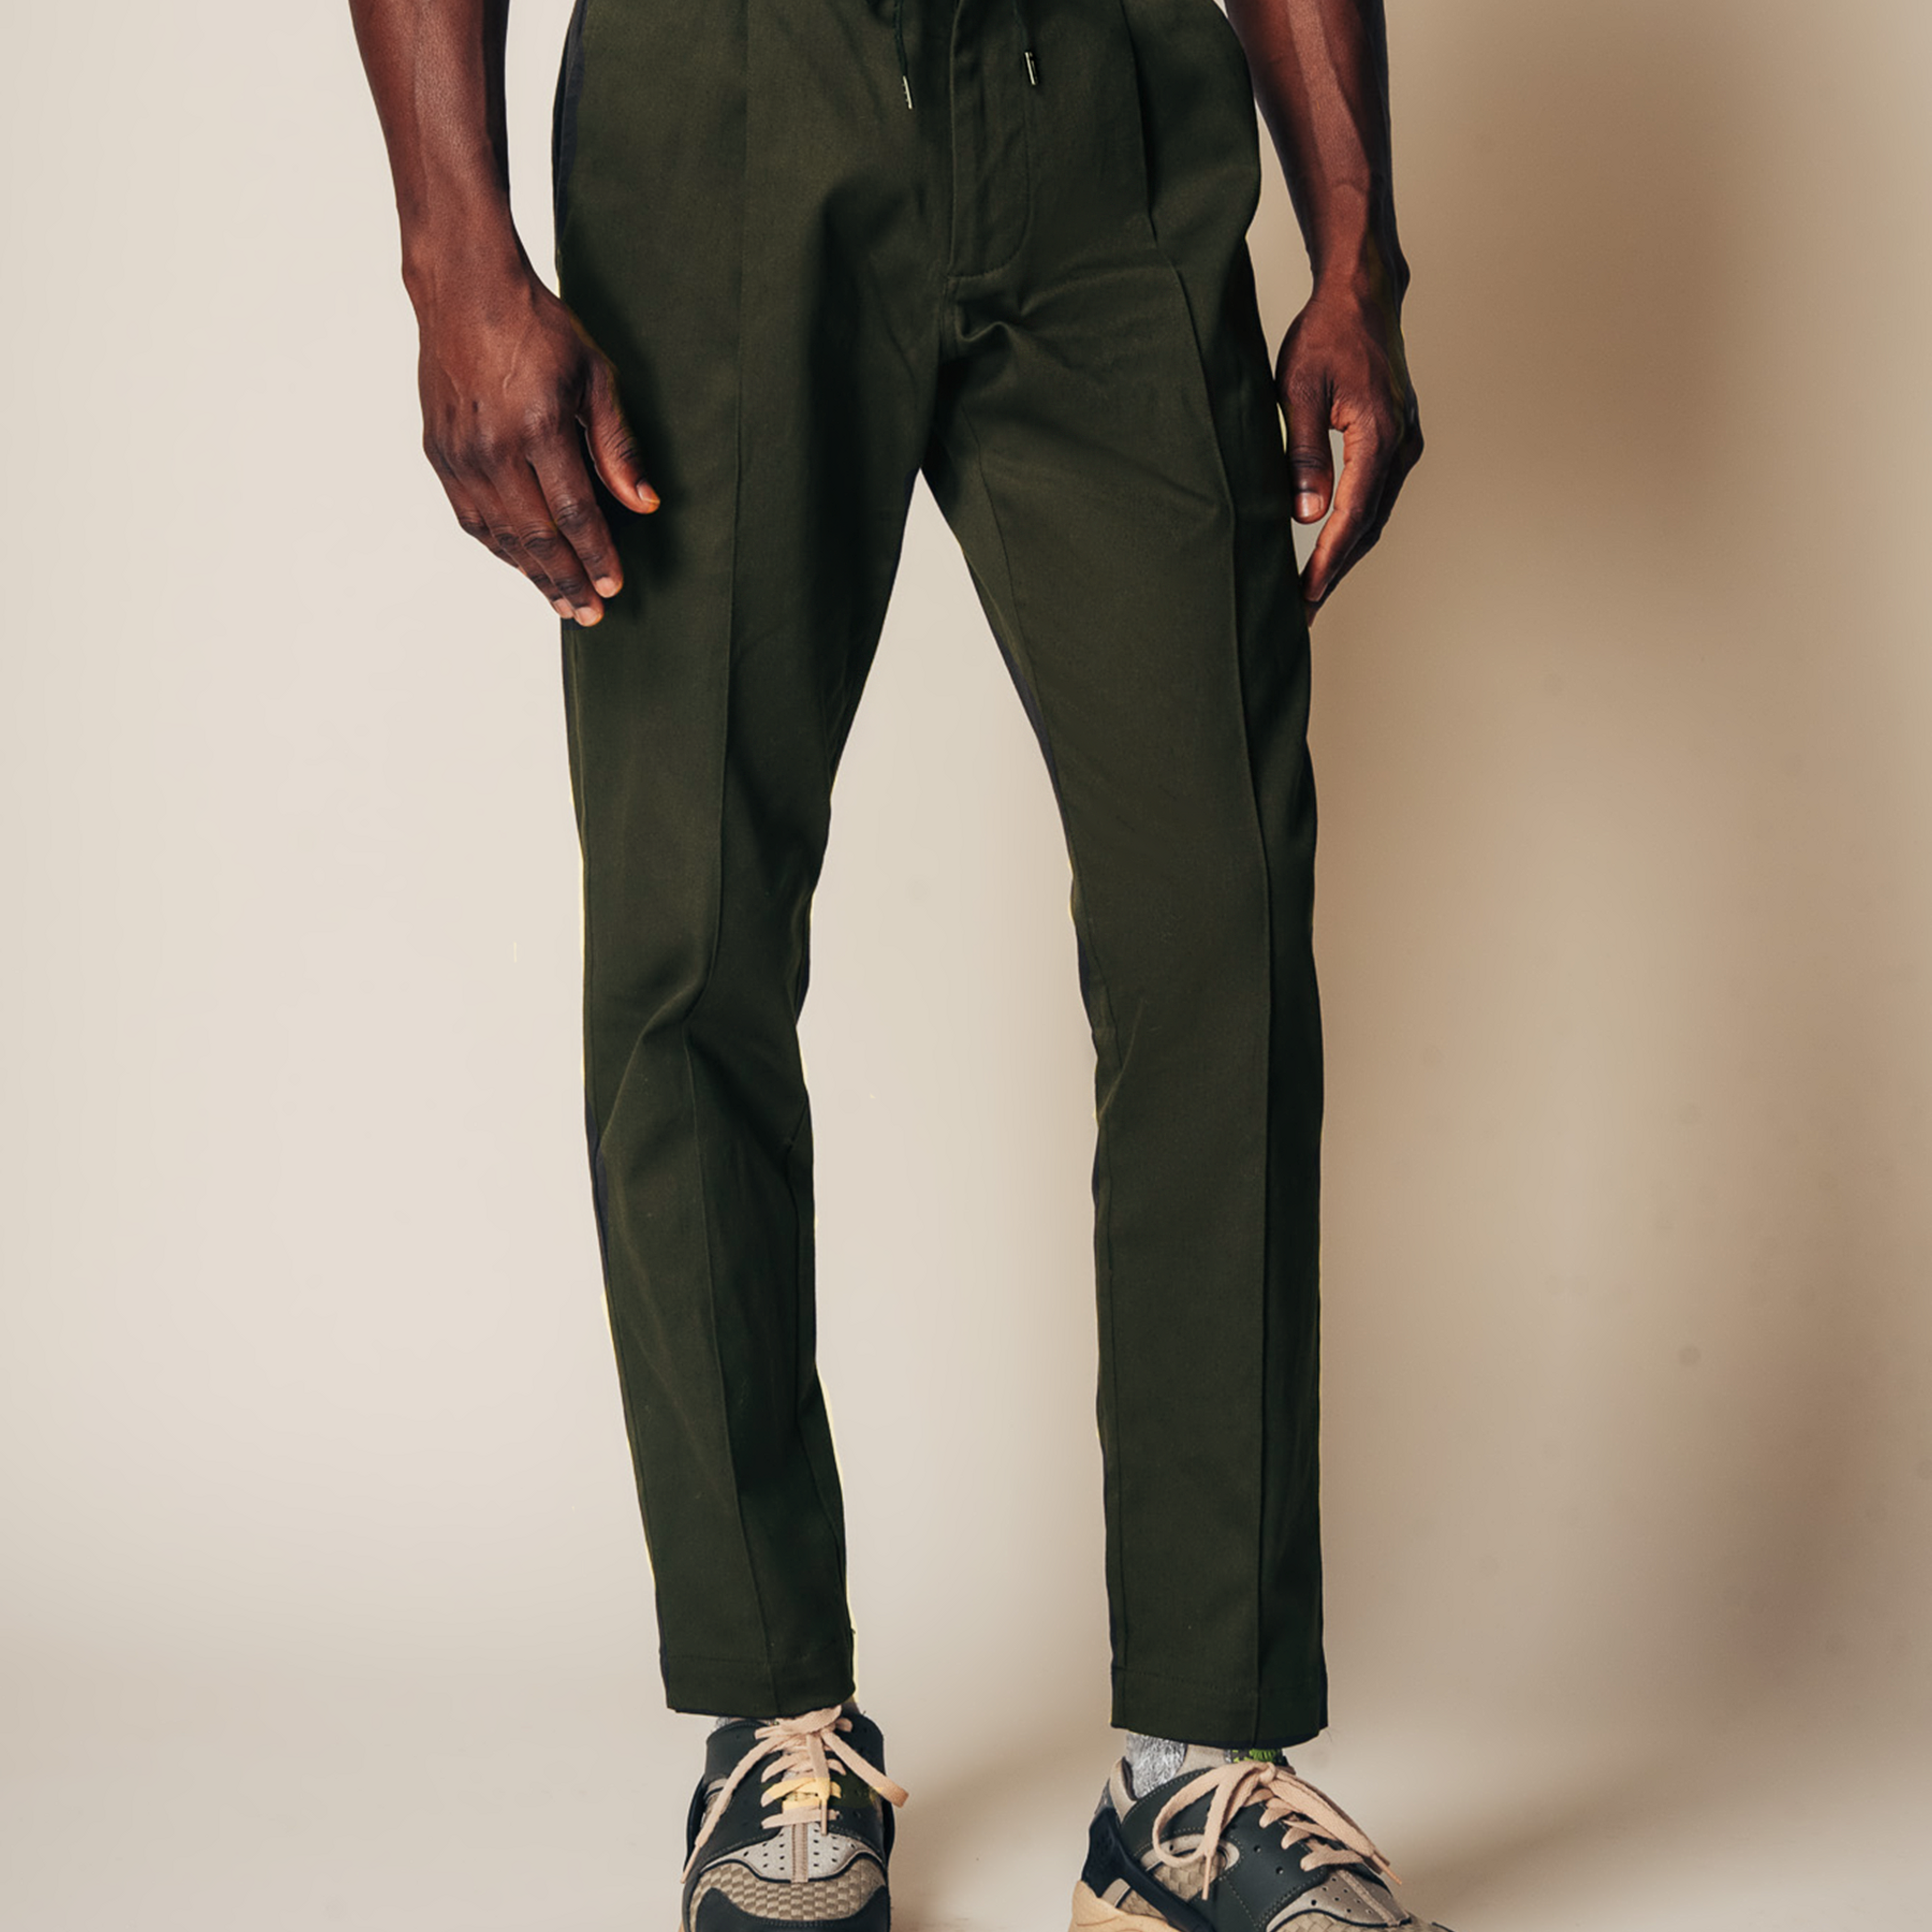 Best Olive Cargo Pants On The Internet